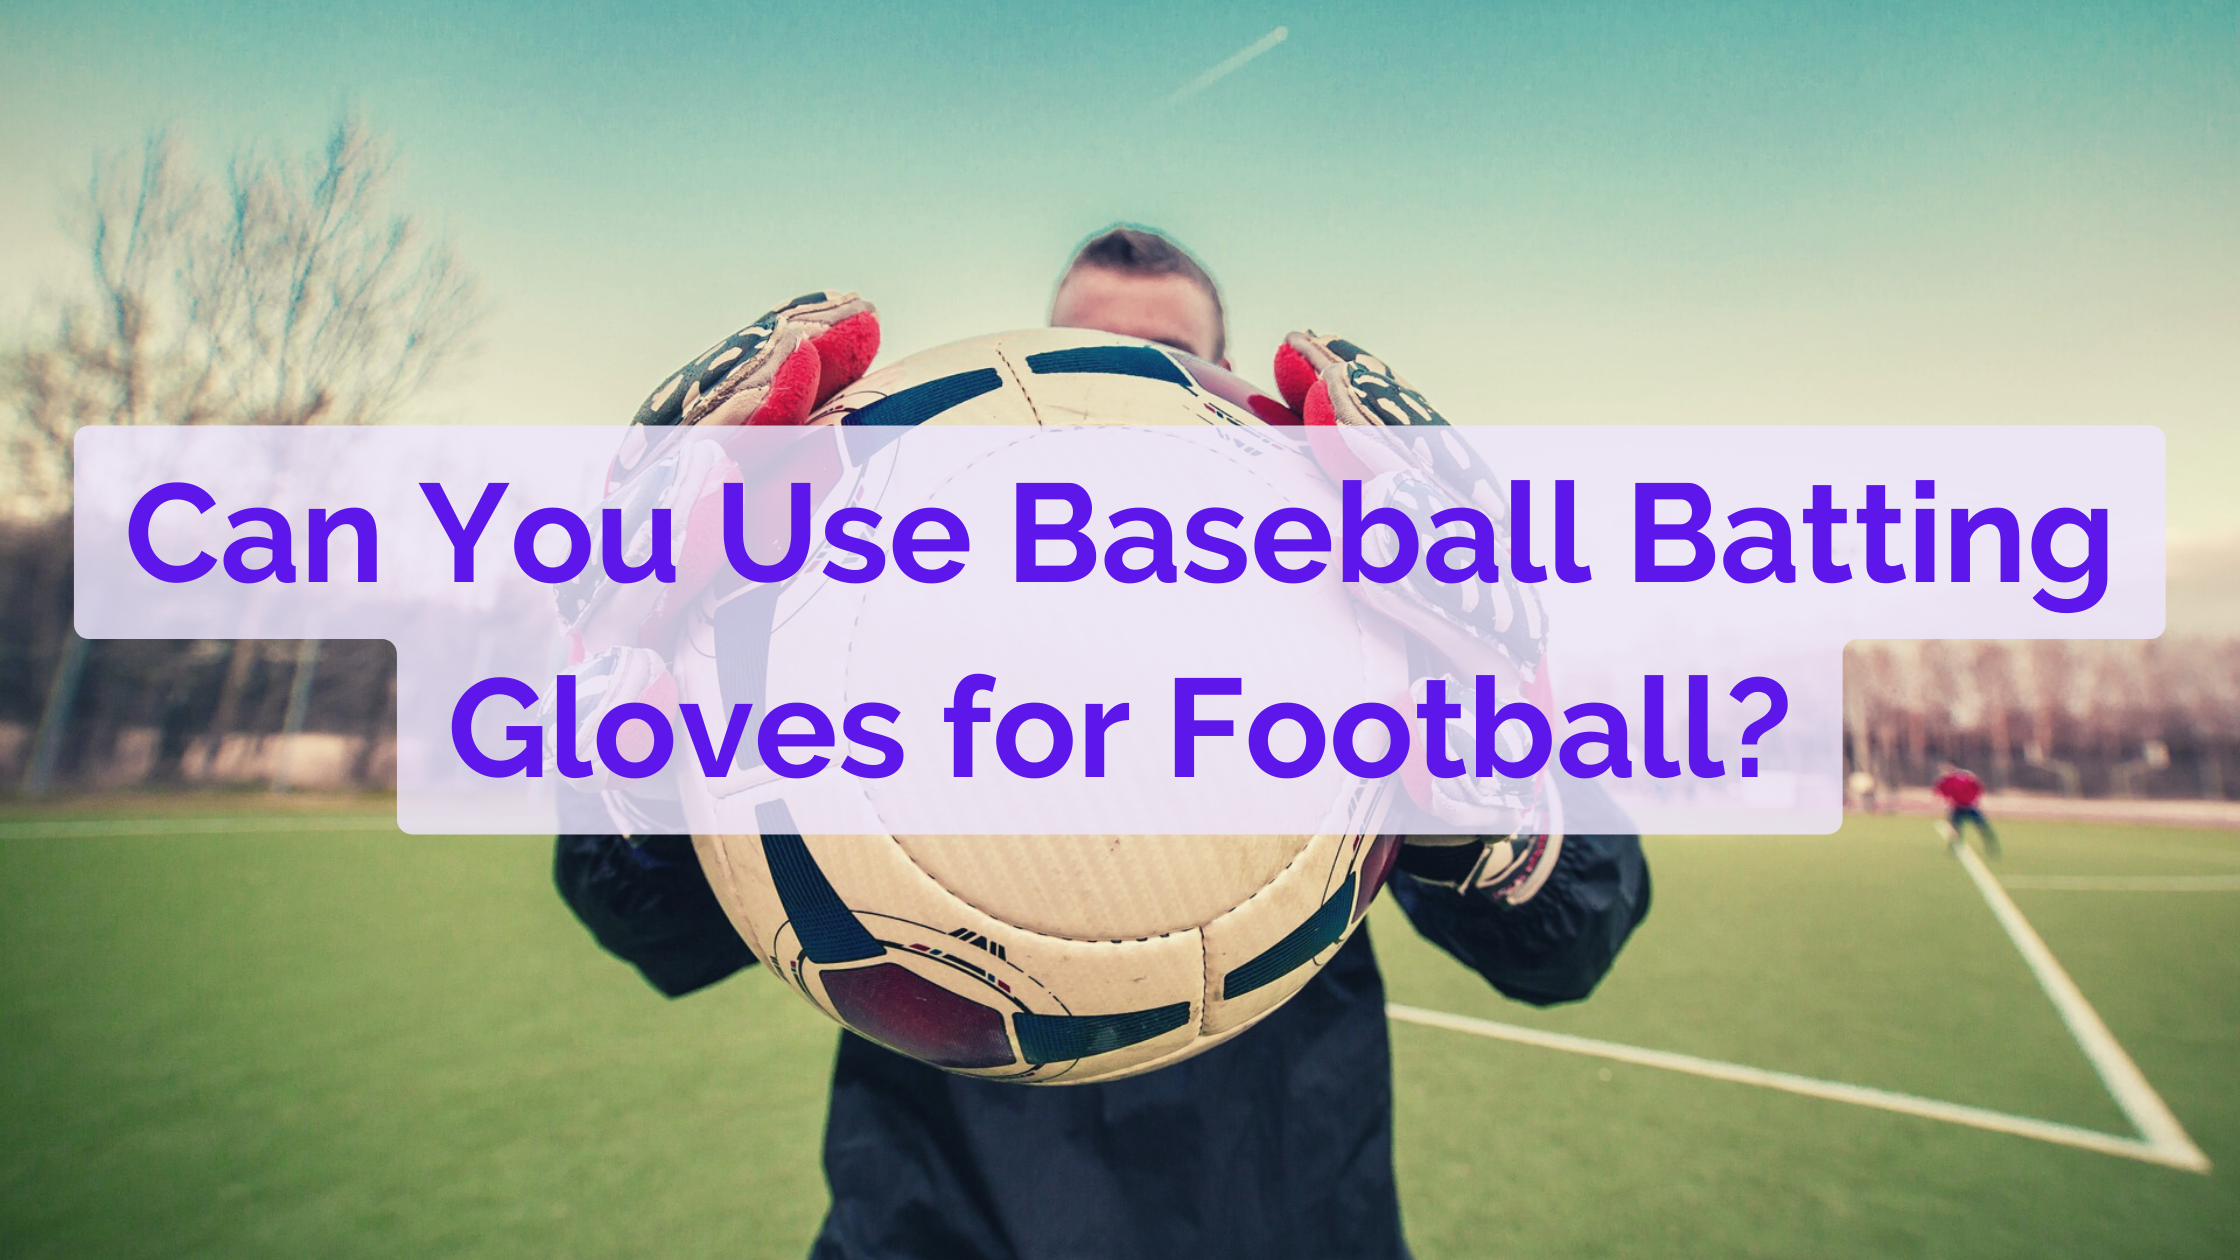 Can You Use Baseball Batting Gloves for Football